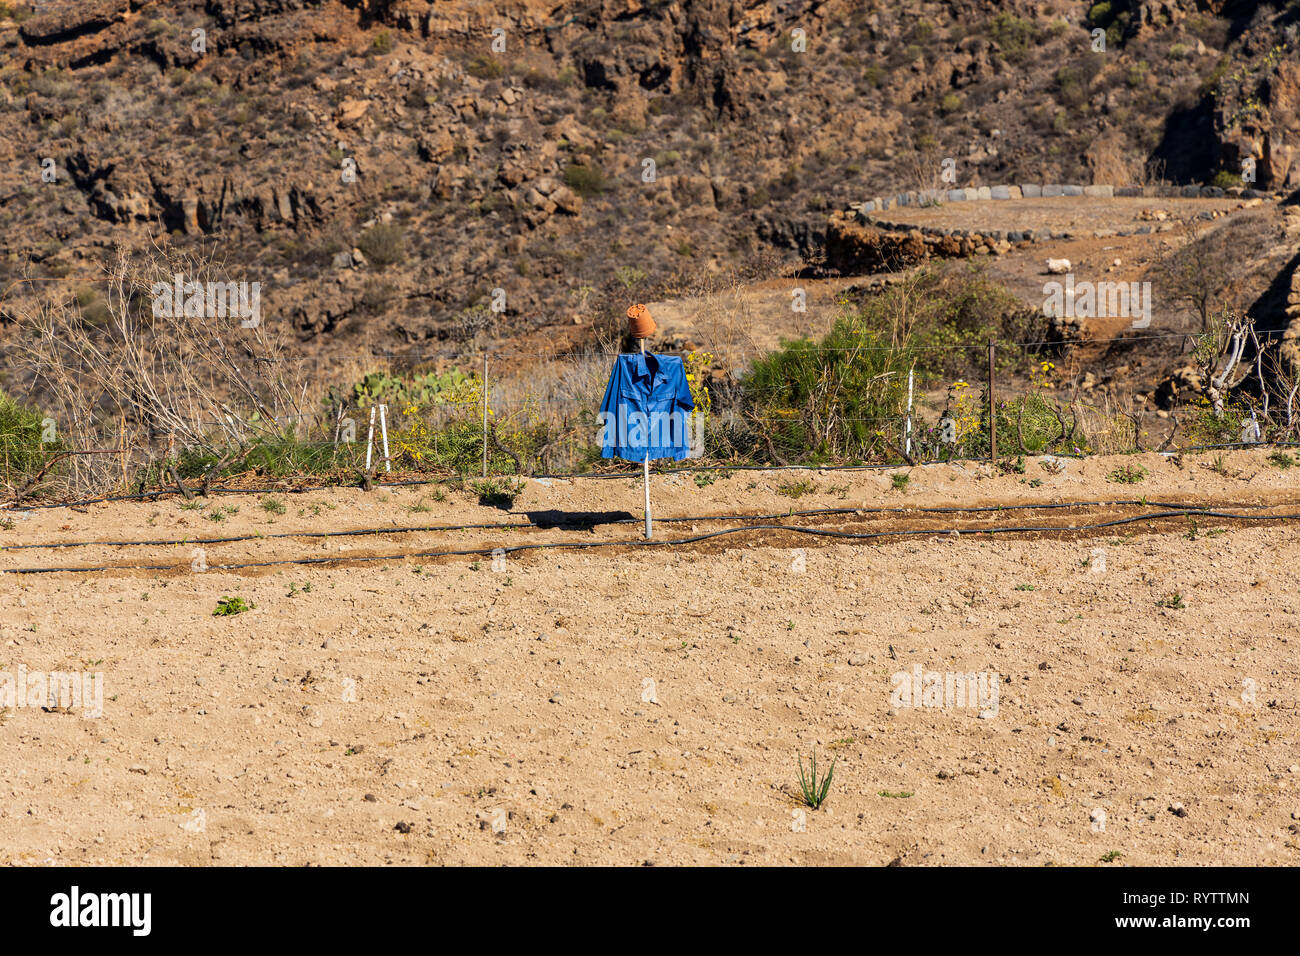 Scarecrow made from a plastic plant pot and a blue shirt in a field in Las Fuentes, Guia de Isora, Tenerife, Canary Islands, Spain Stock Photo